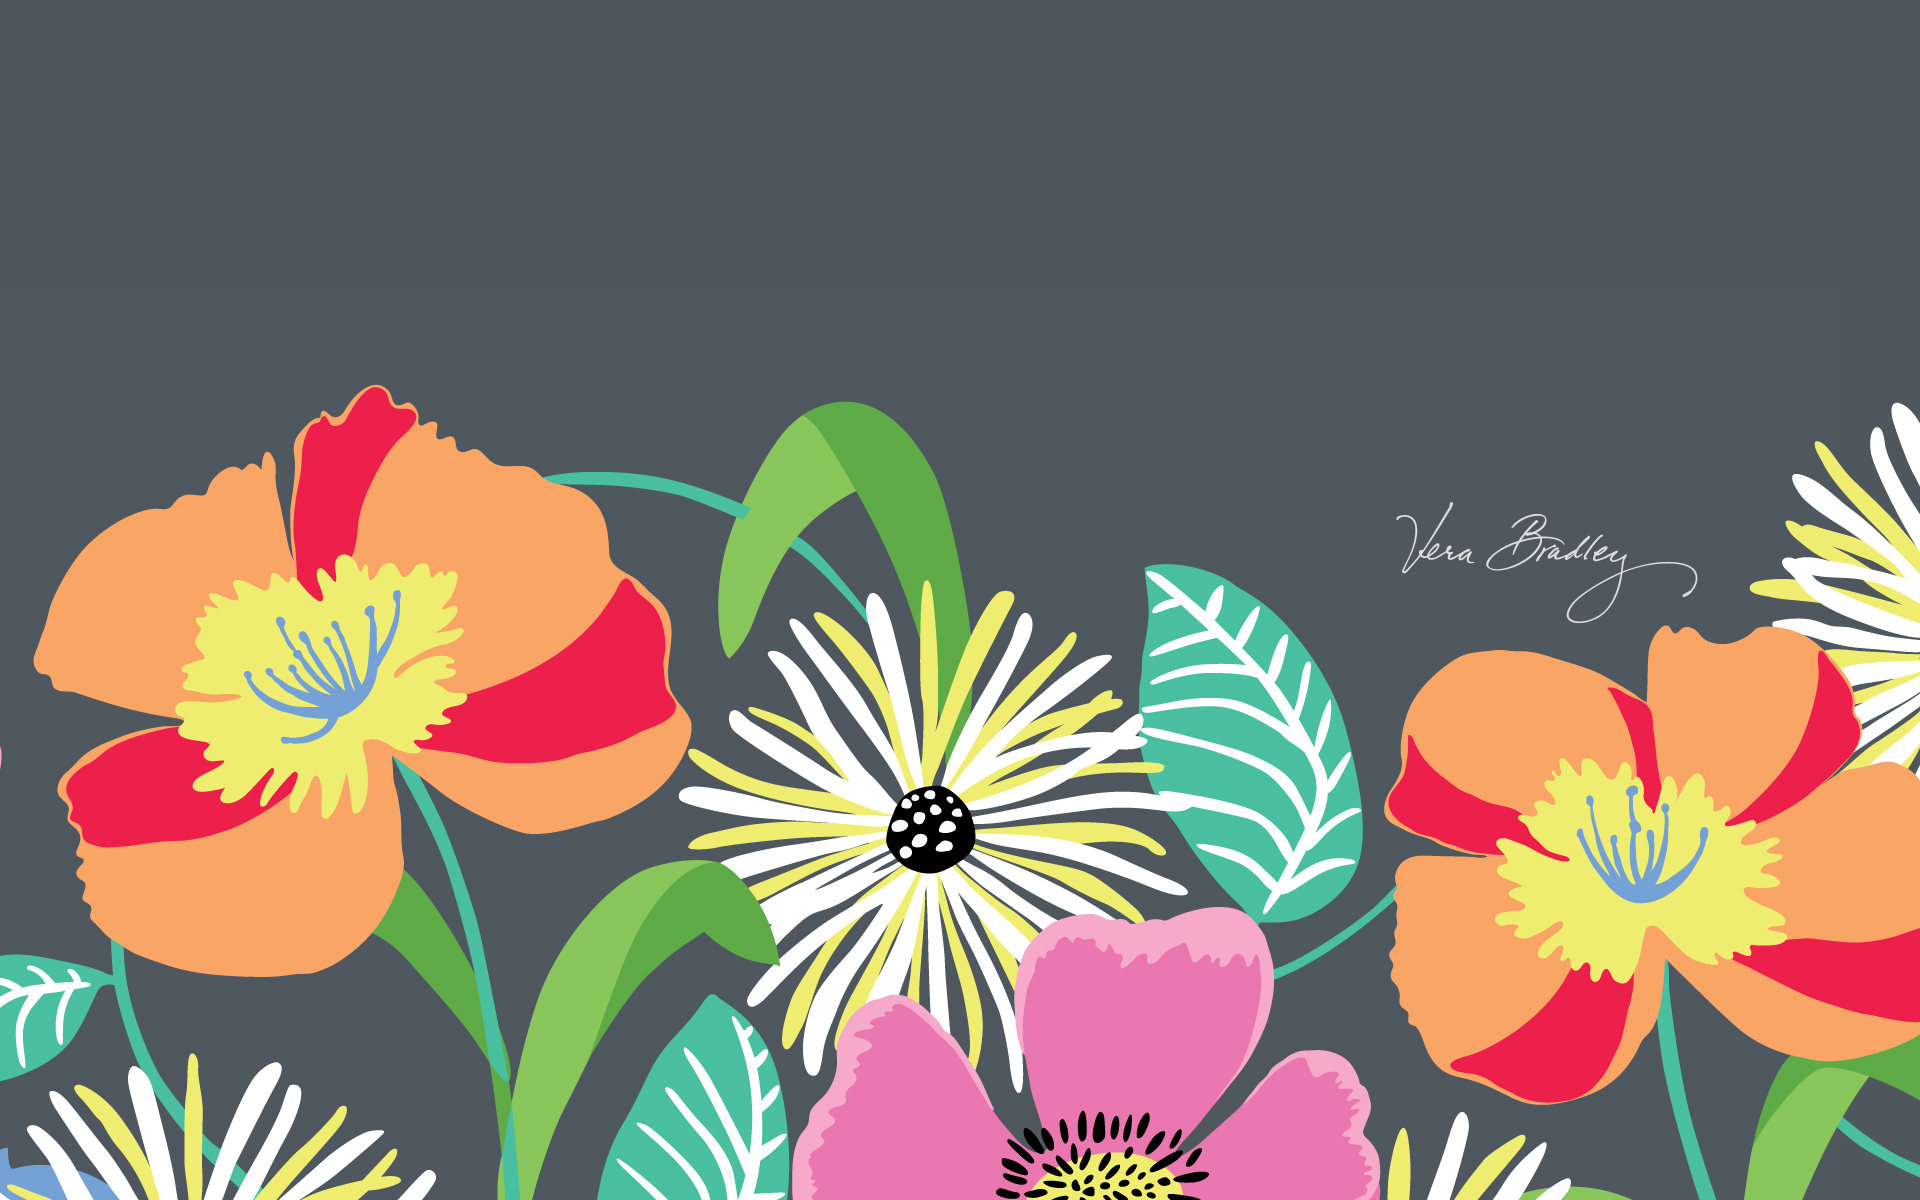 Love The New Colors Jazzy Blooms Is My Desktop Background